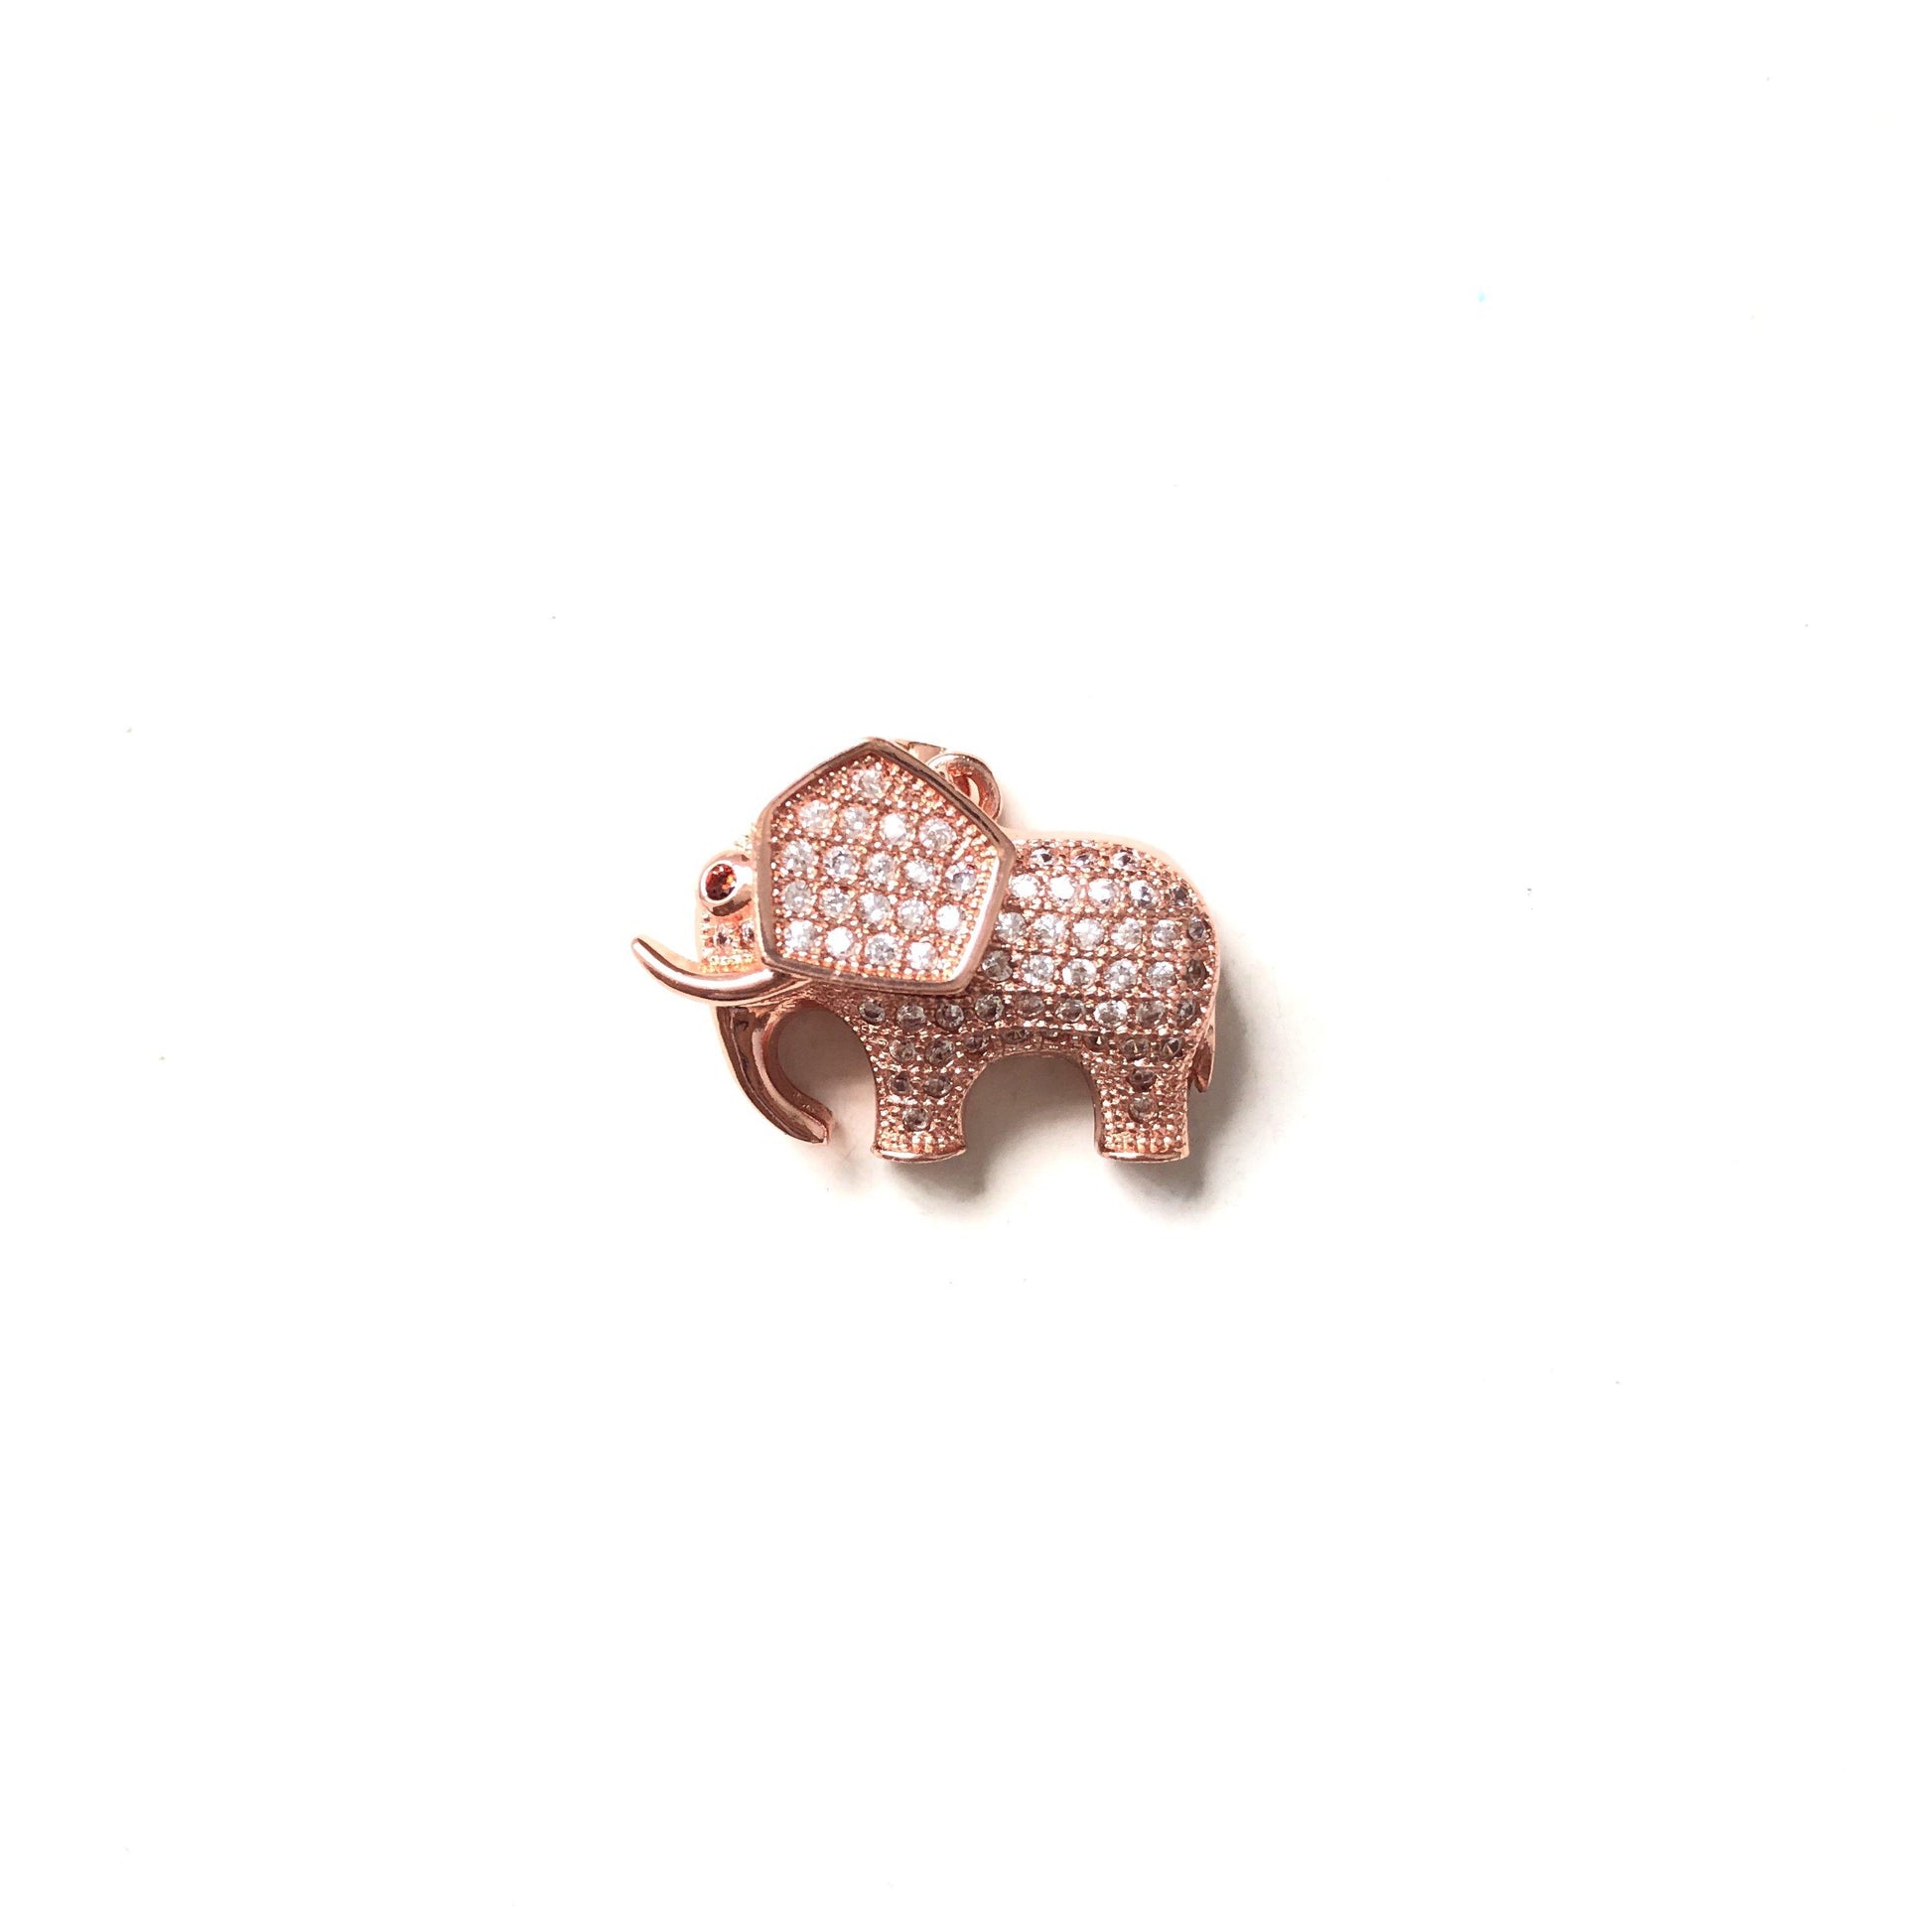 10pcs/lot 22*17mm CZ Paved Elephant Charms Rose Gold CZ Paved Charms Animals & Insects Charms Beads Beyond